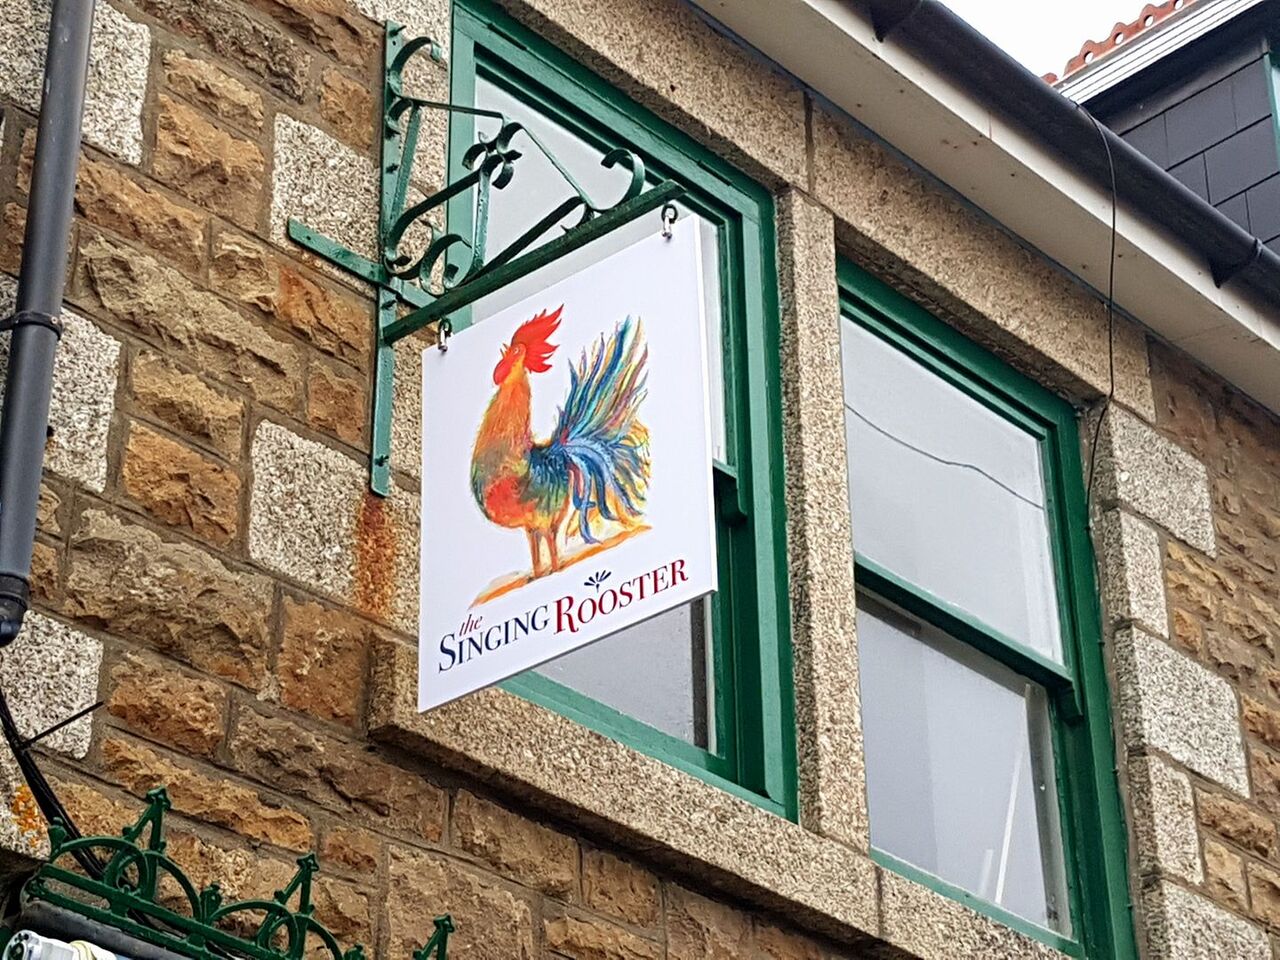 A photo of The Singing Rooster